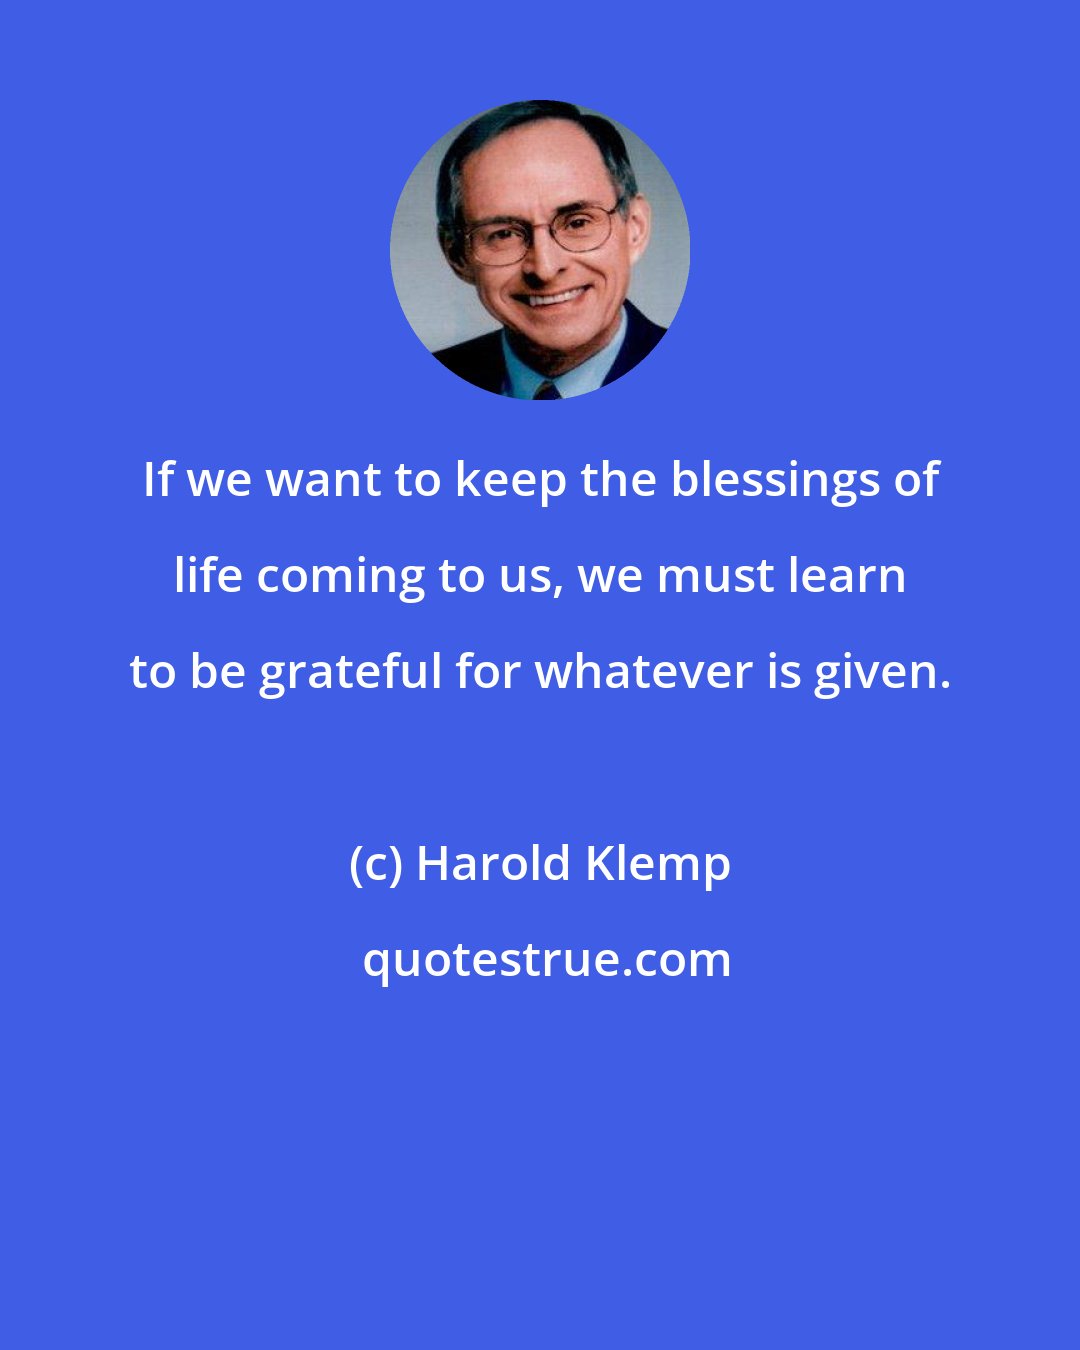 Harold Klemp: If we want to keep the blessings of life coming to us, we must learn to be grateful for whatever is given.